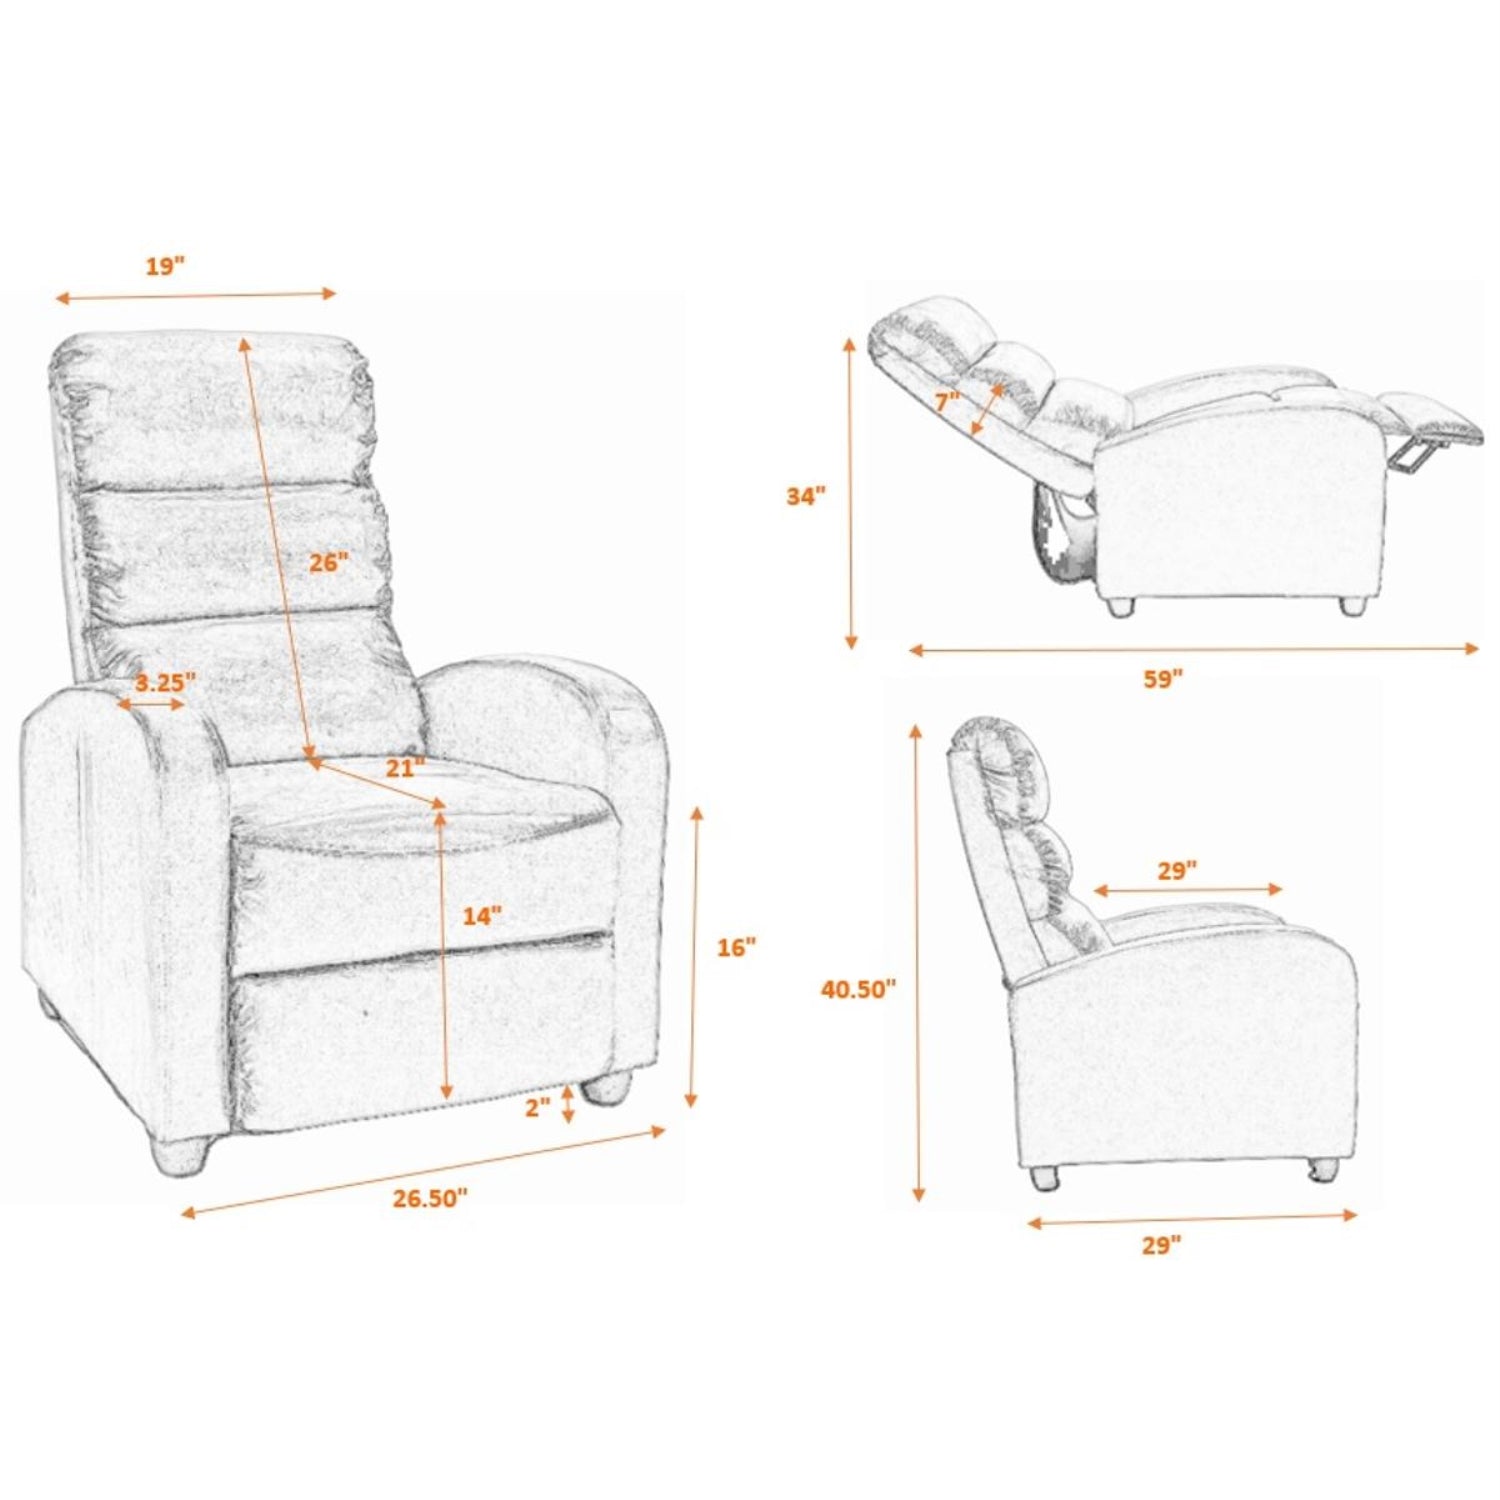 ViscoLogic EuroLuxe Theatre Seating Living Room  Lounge Adjustable Manual Recliner Sofa Chair